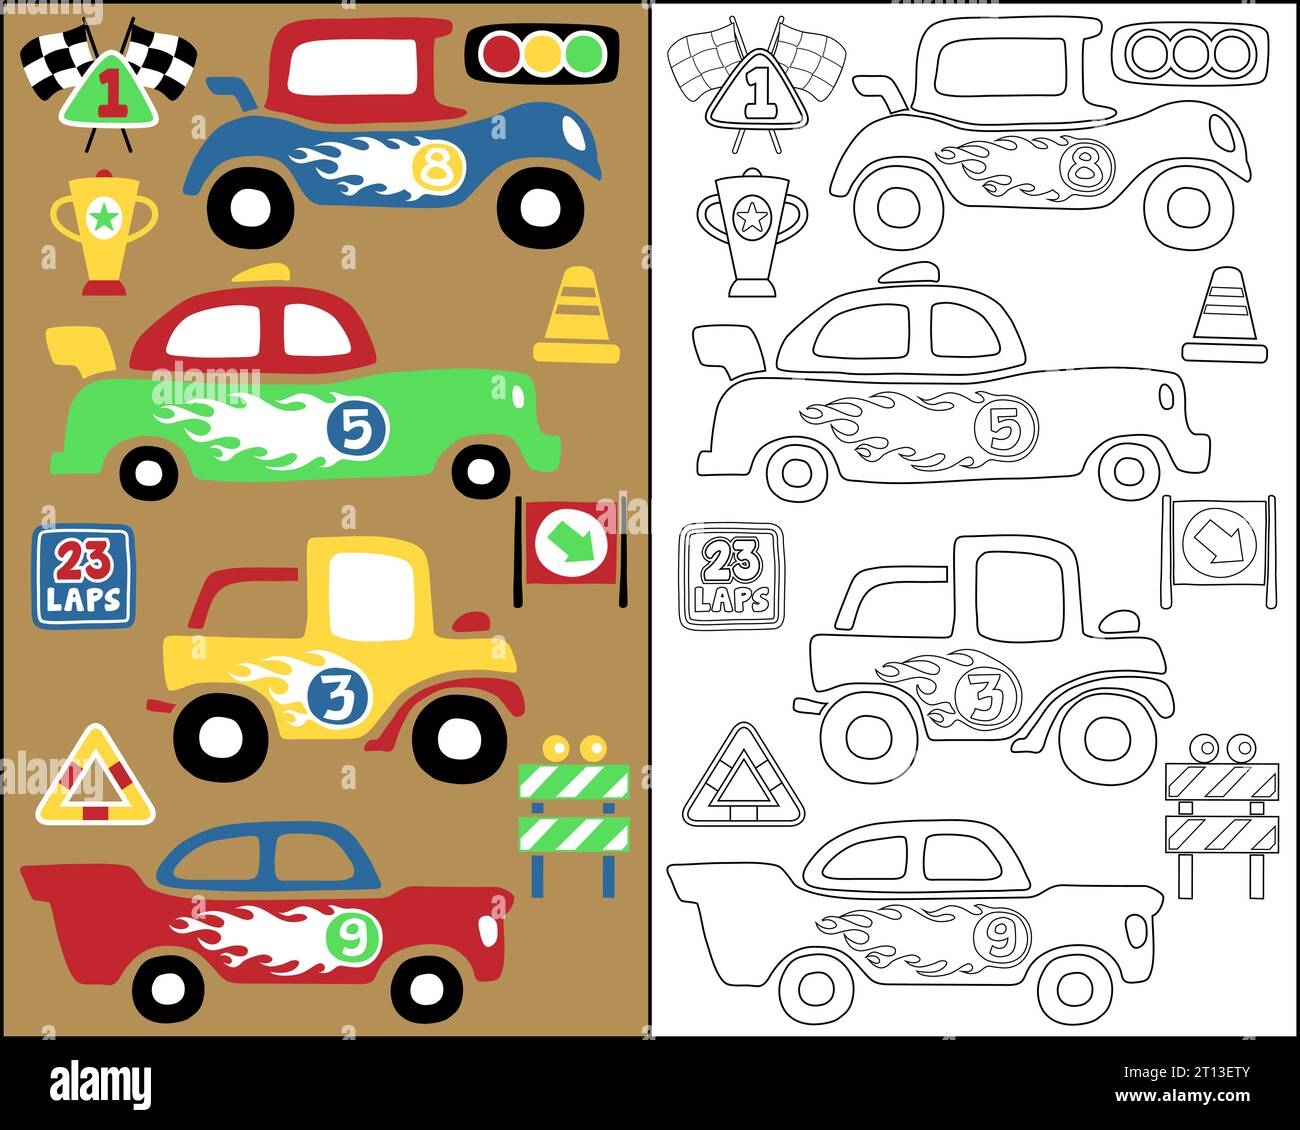 Vector illustration of vintage race cars with racing elements cartoon, coloring book or page Stock Vector